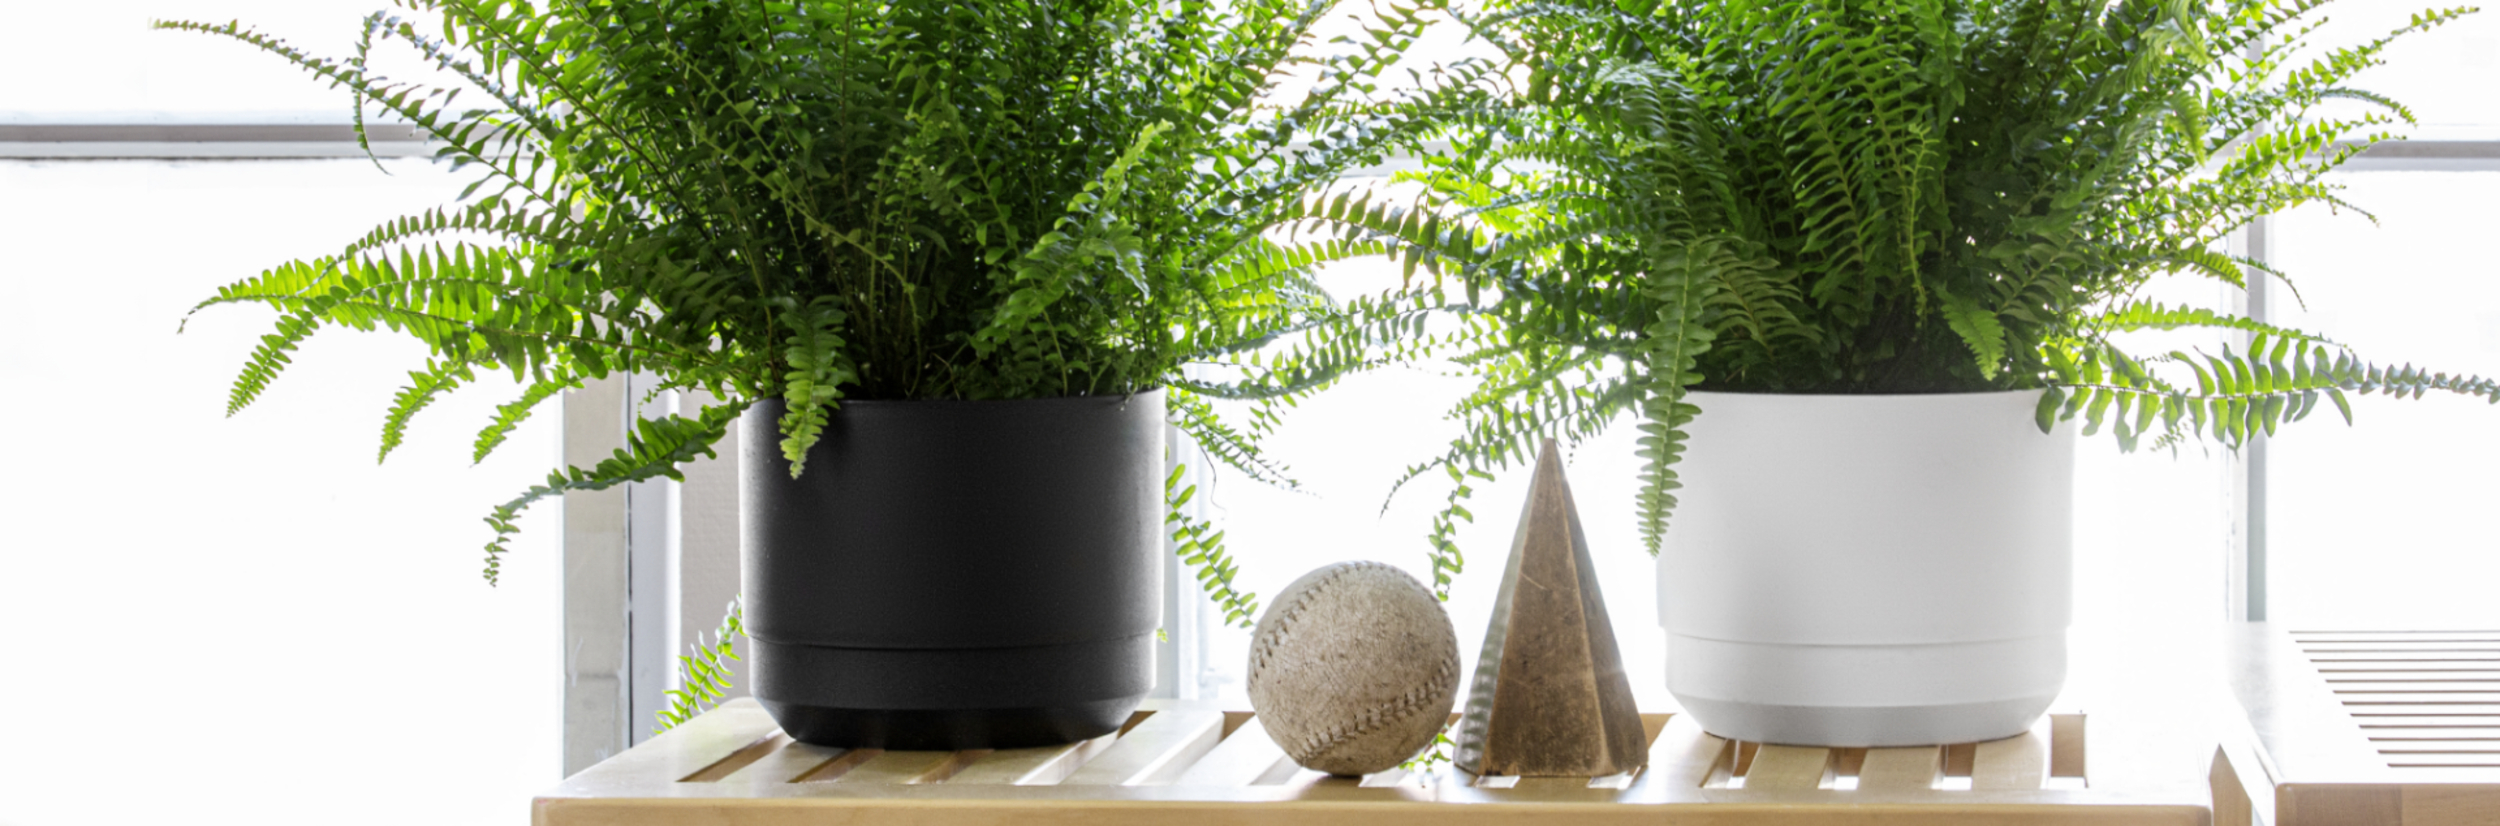 Self-watering pots in recycled material